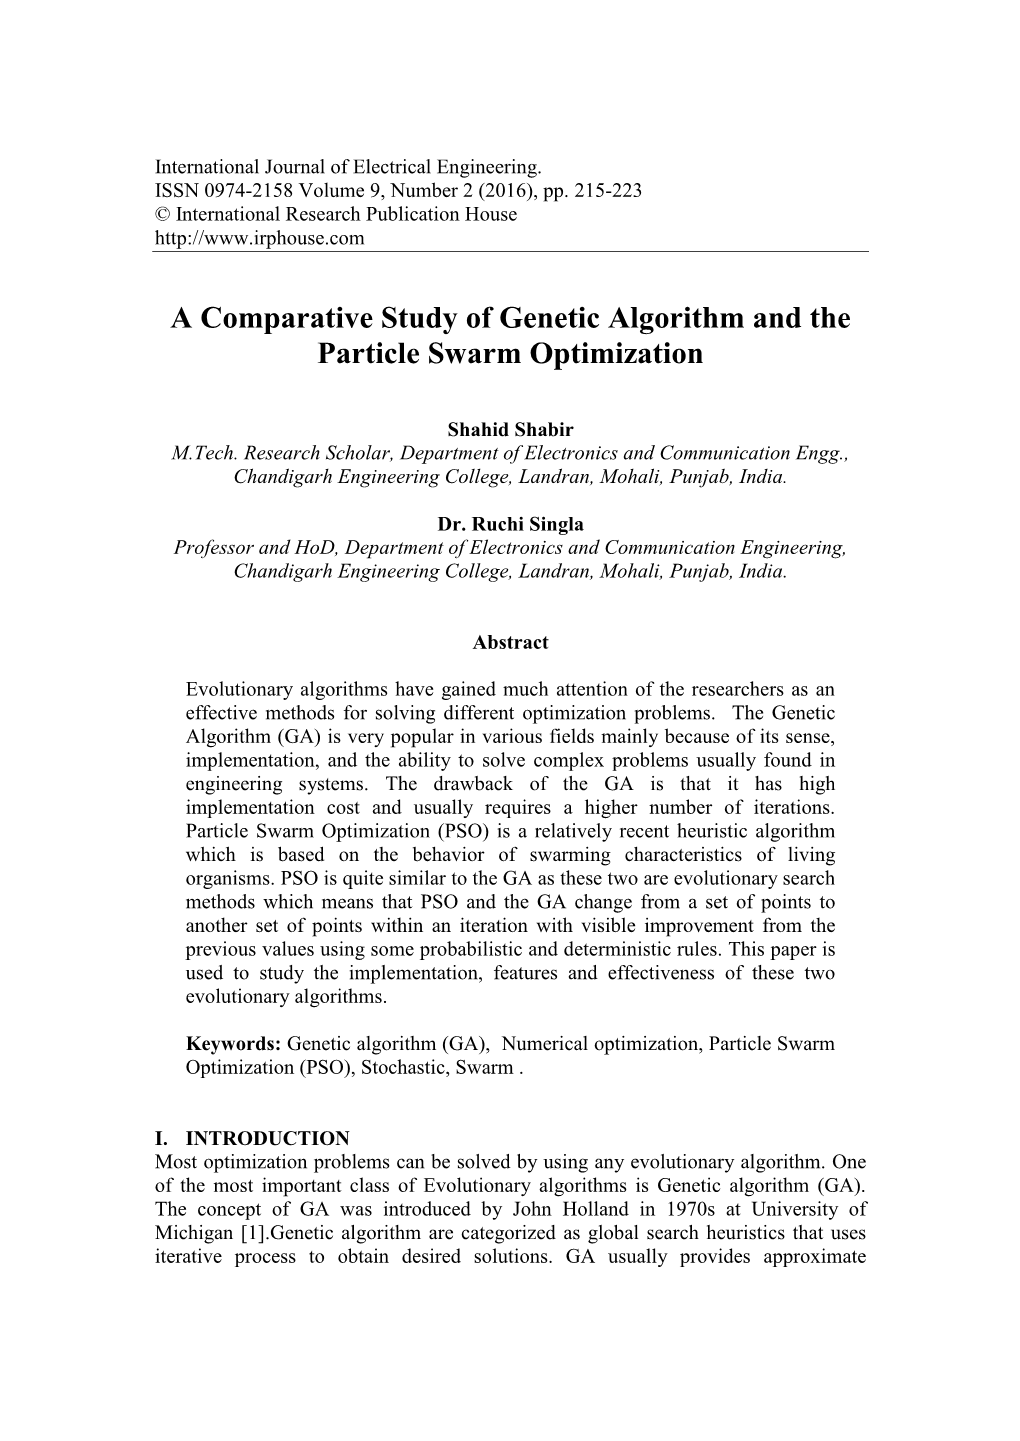 A Comparative Study of Genetic Algorithm and the Particle Swarm Optimization